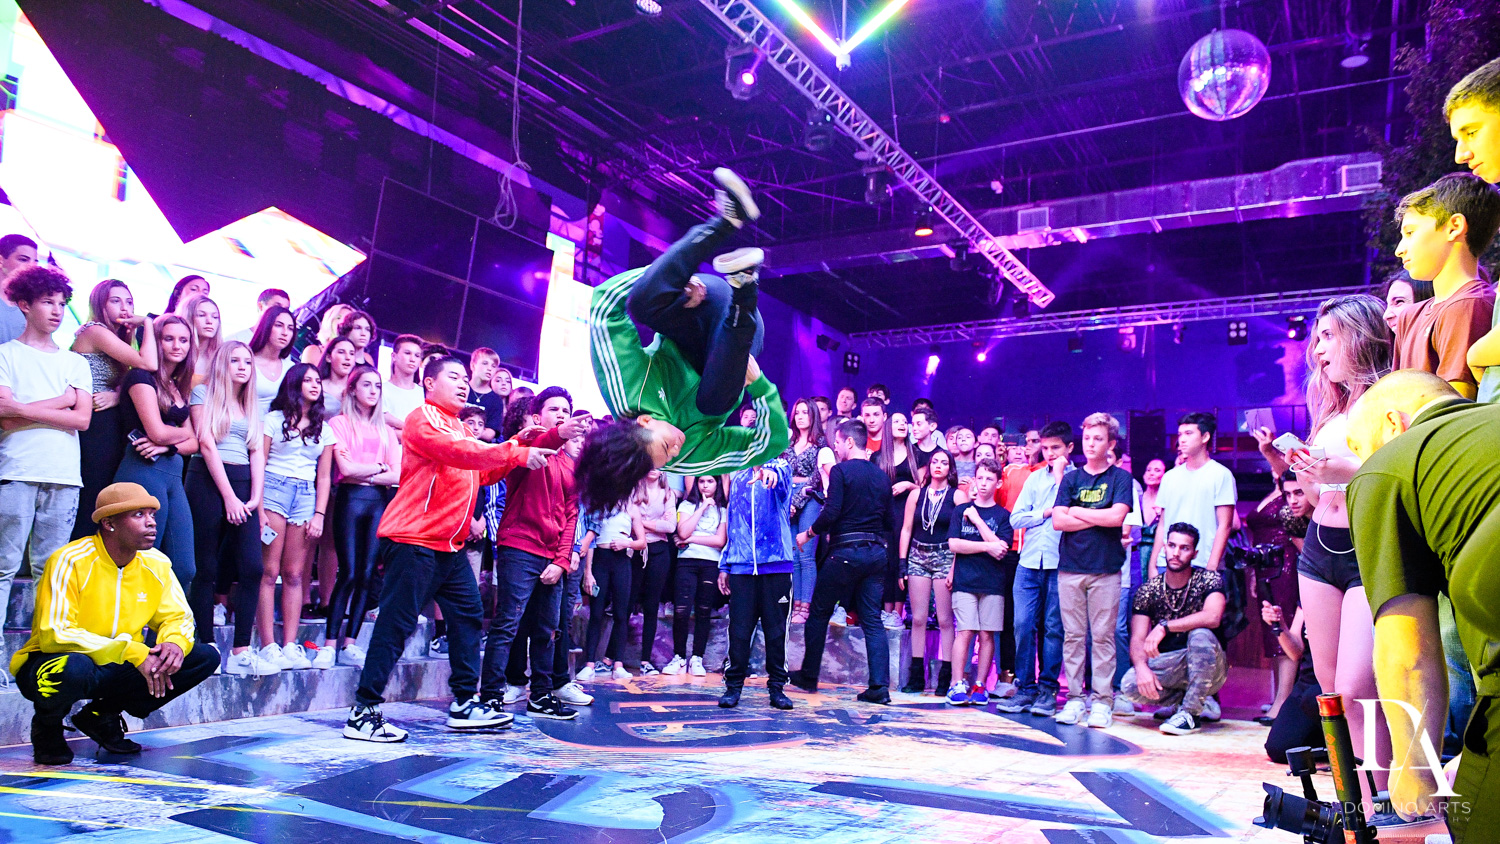 break dancers at Urban Graffiti BNai Mitzvah with celebrity Shaq at Xtreme Action Park by Domino Arts Photography